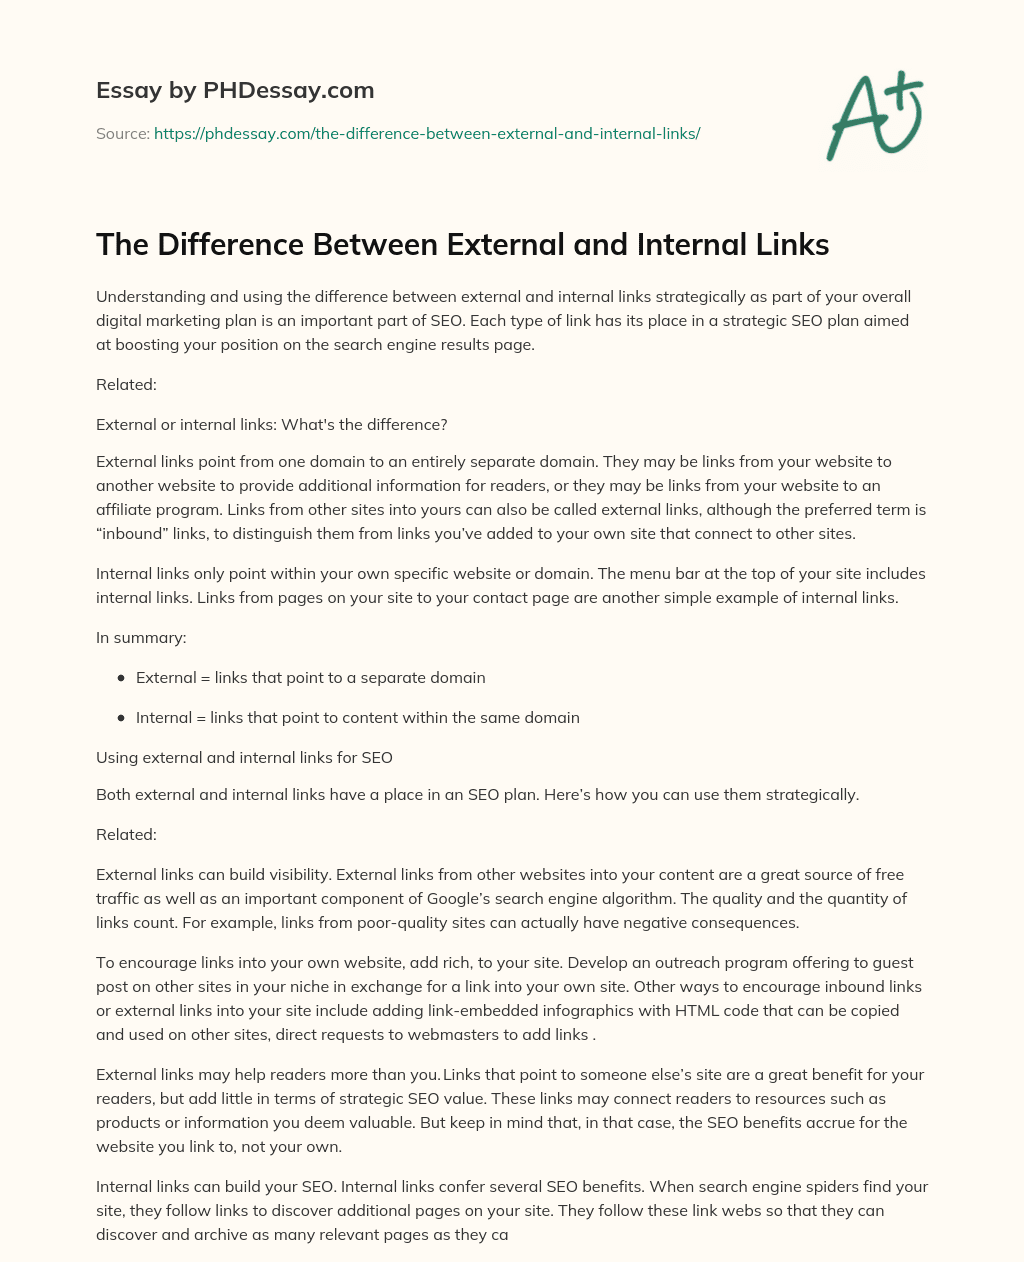 The Difference Between External and Internal Links essay